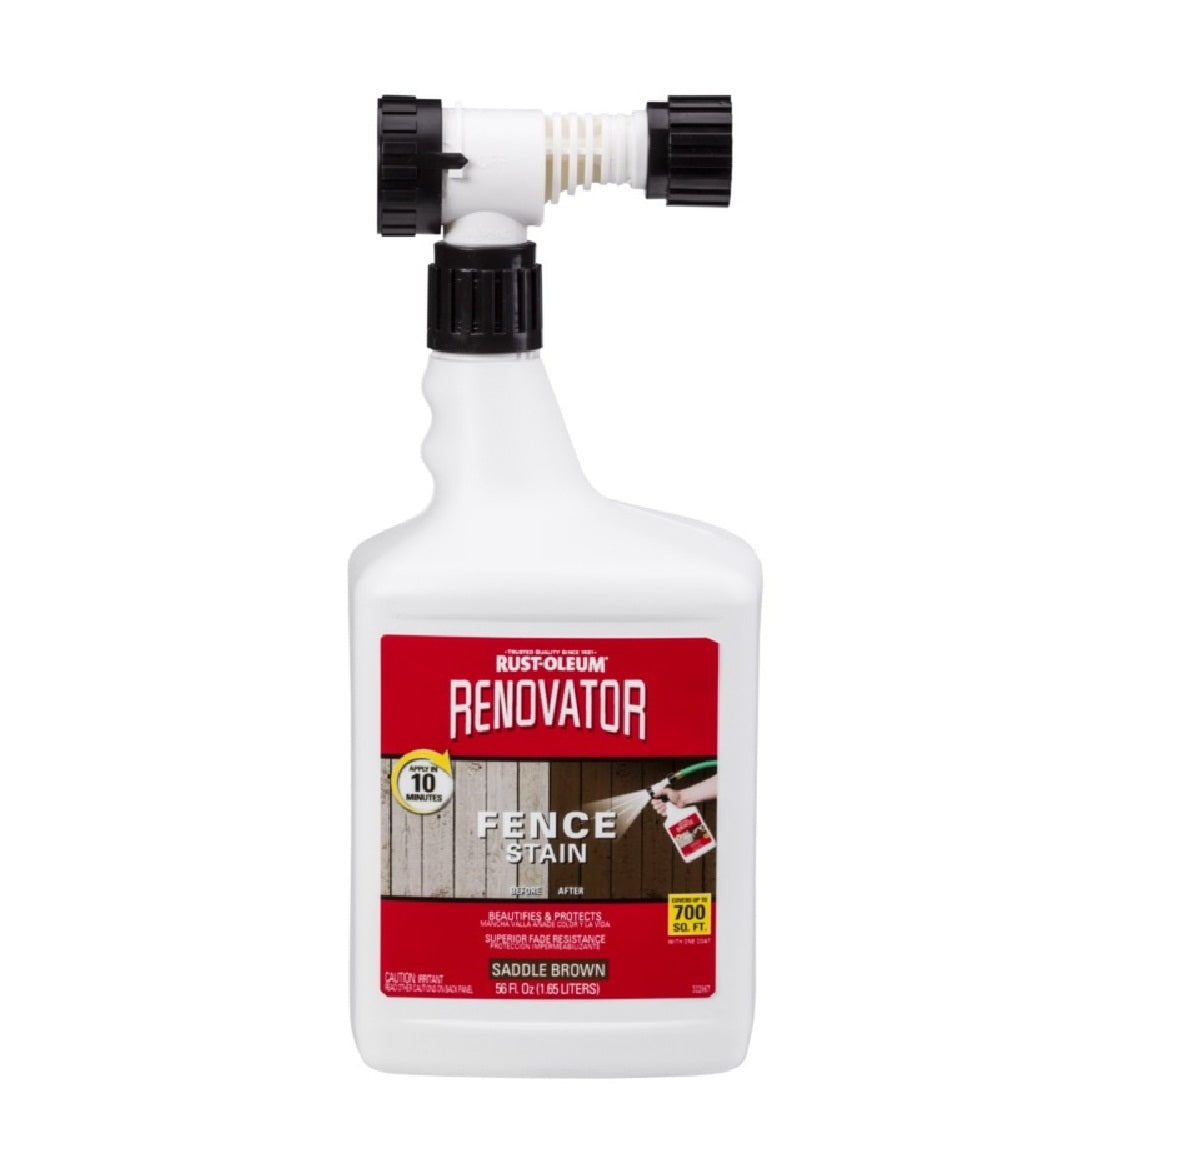 Buy renovator fence stain - Online store for exterior stains & finishes, semi-transparent in USA, on sale, low price, discount deals, coupon code